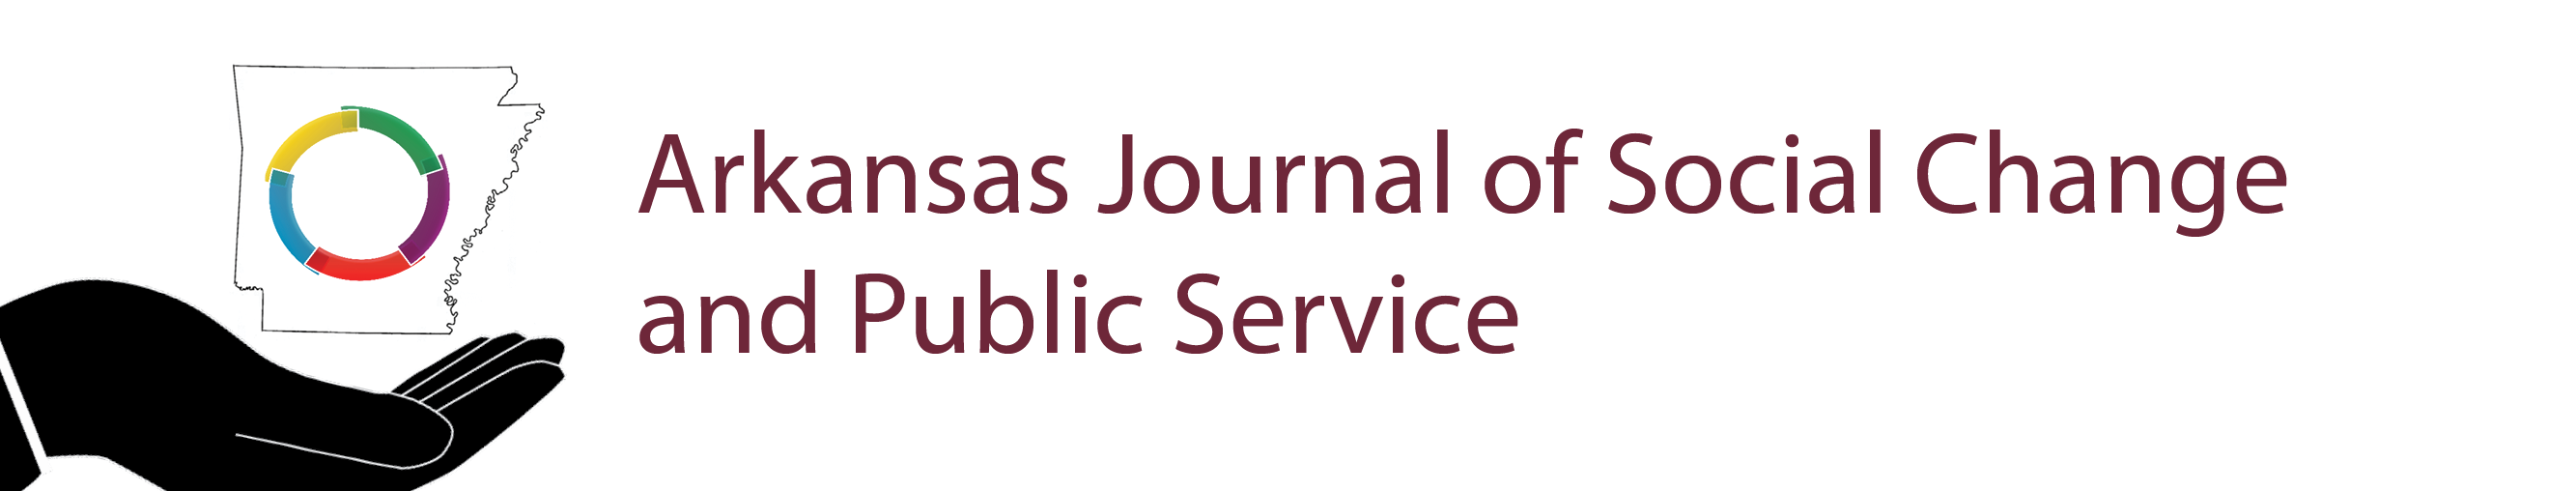 The Arkansas Journal of Social Change and Public Service